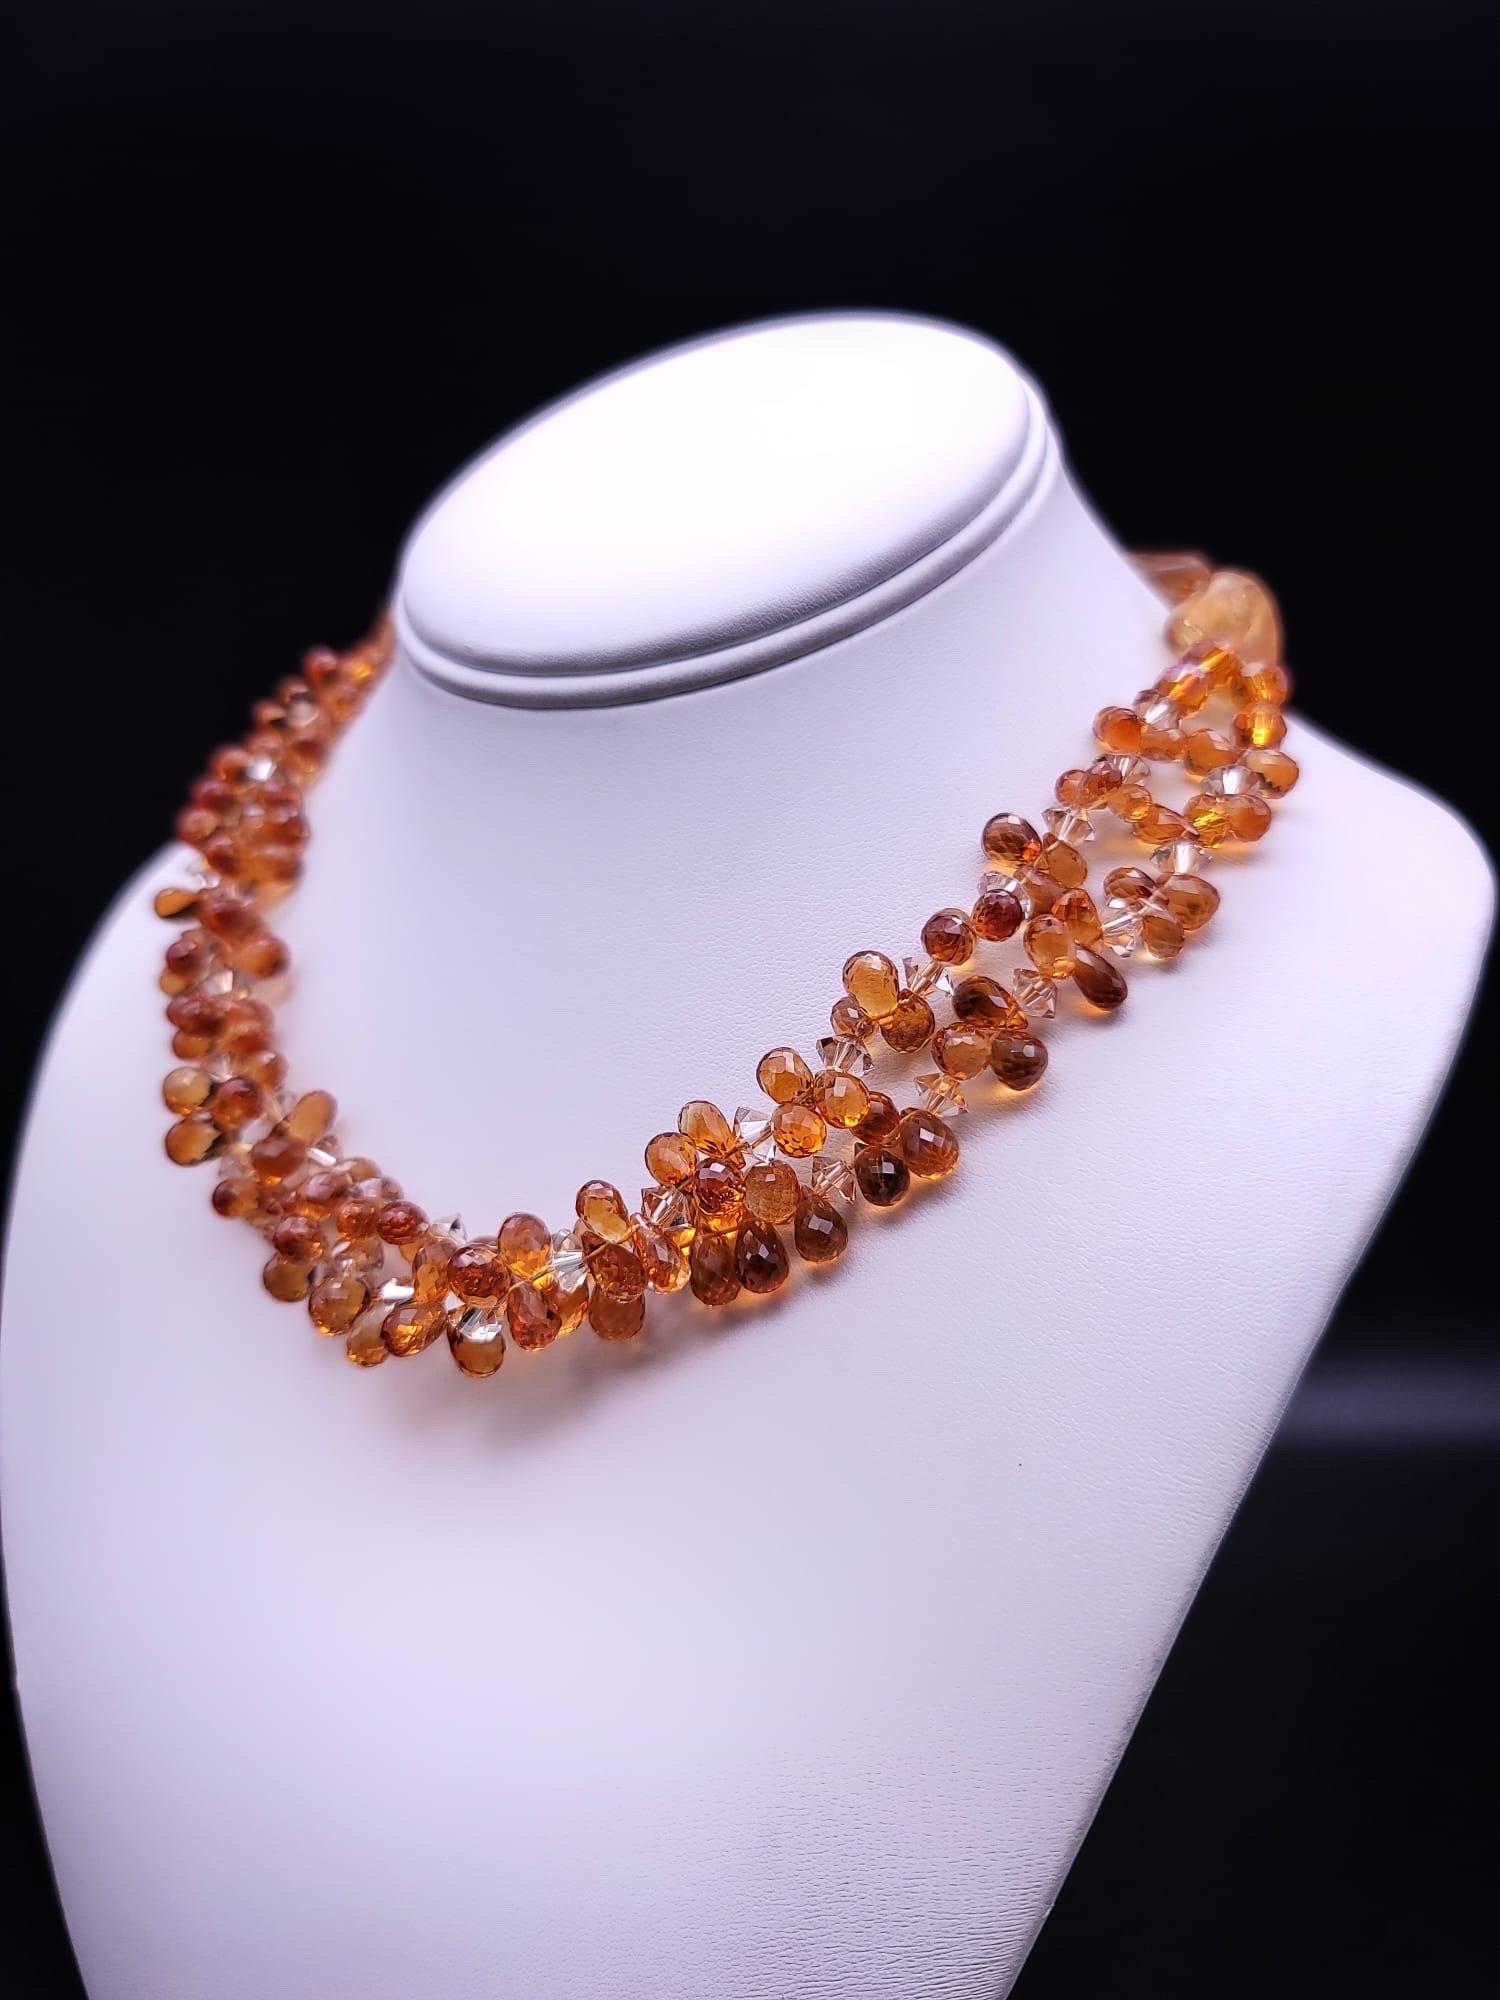 One-of-a-Kind

Two strands of richly colored, facetted Topaz teardrops mixed with a shade lighter Swarovski roundels form a ruffle around the neck caught by a single strand of sunstone and Topaz. The necklace is anchored by a polished Oak yellow